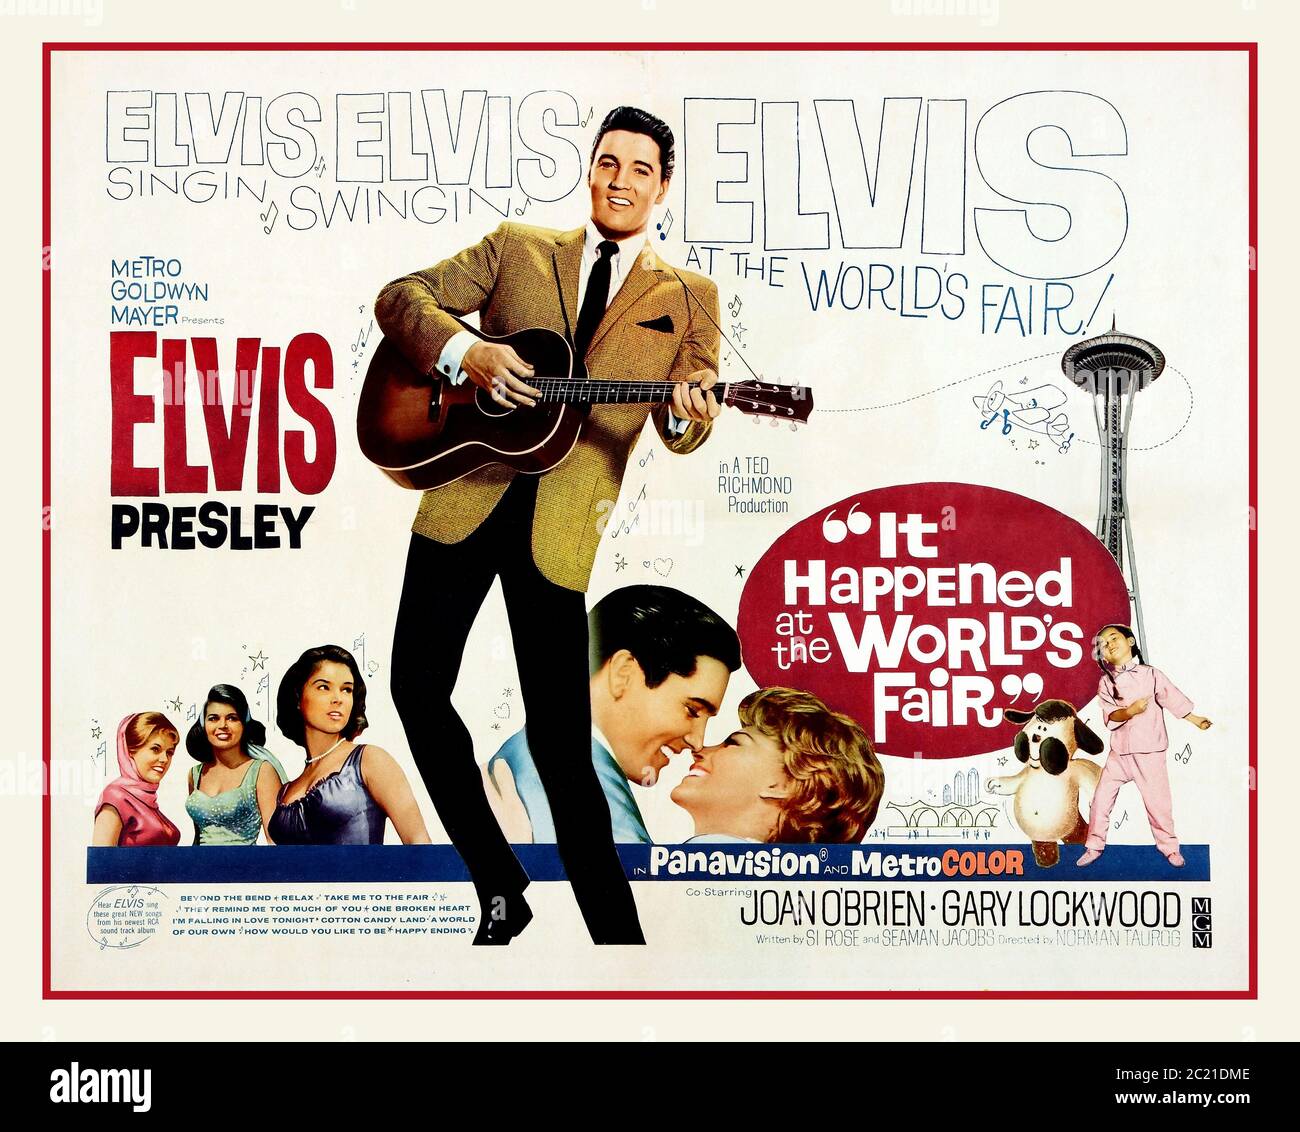 Vintage Movie Poster ‘It Happened at the Worlds Fair’ Elvis Presley 1963 American musical film starring Elvis Presley as a crop-dusting pilot. It was filmed in Seattle, Washington, site of the Century 21 Exposition, also known as the Seattle World's Fair of 1962. Also starring Joan O’Brien and Gary Lockwood MGM studios Produced by Ted Richmond Stock Photo